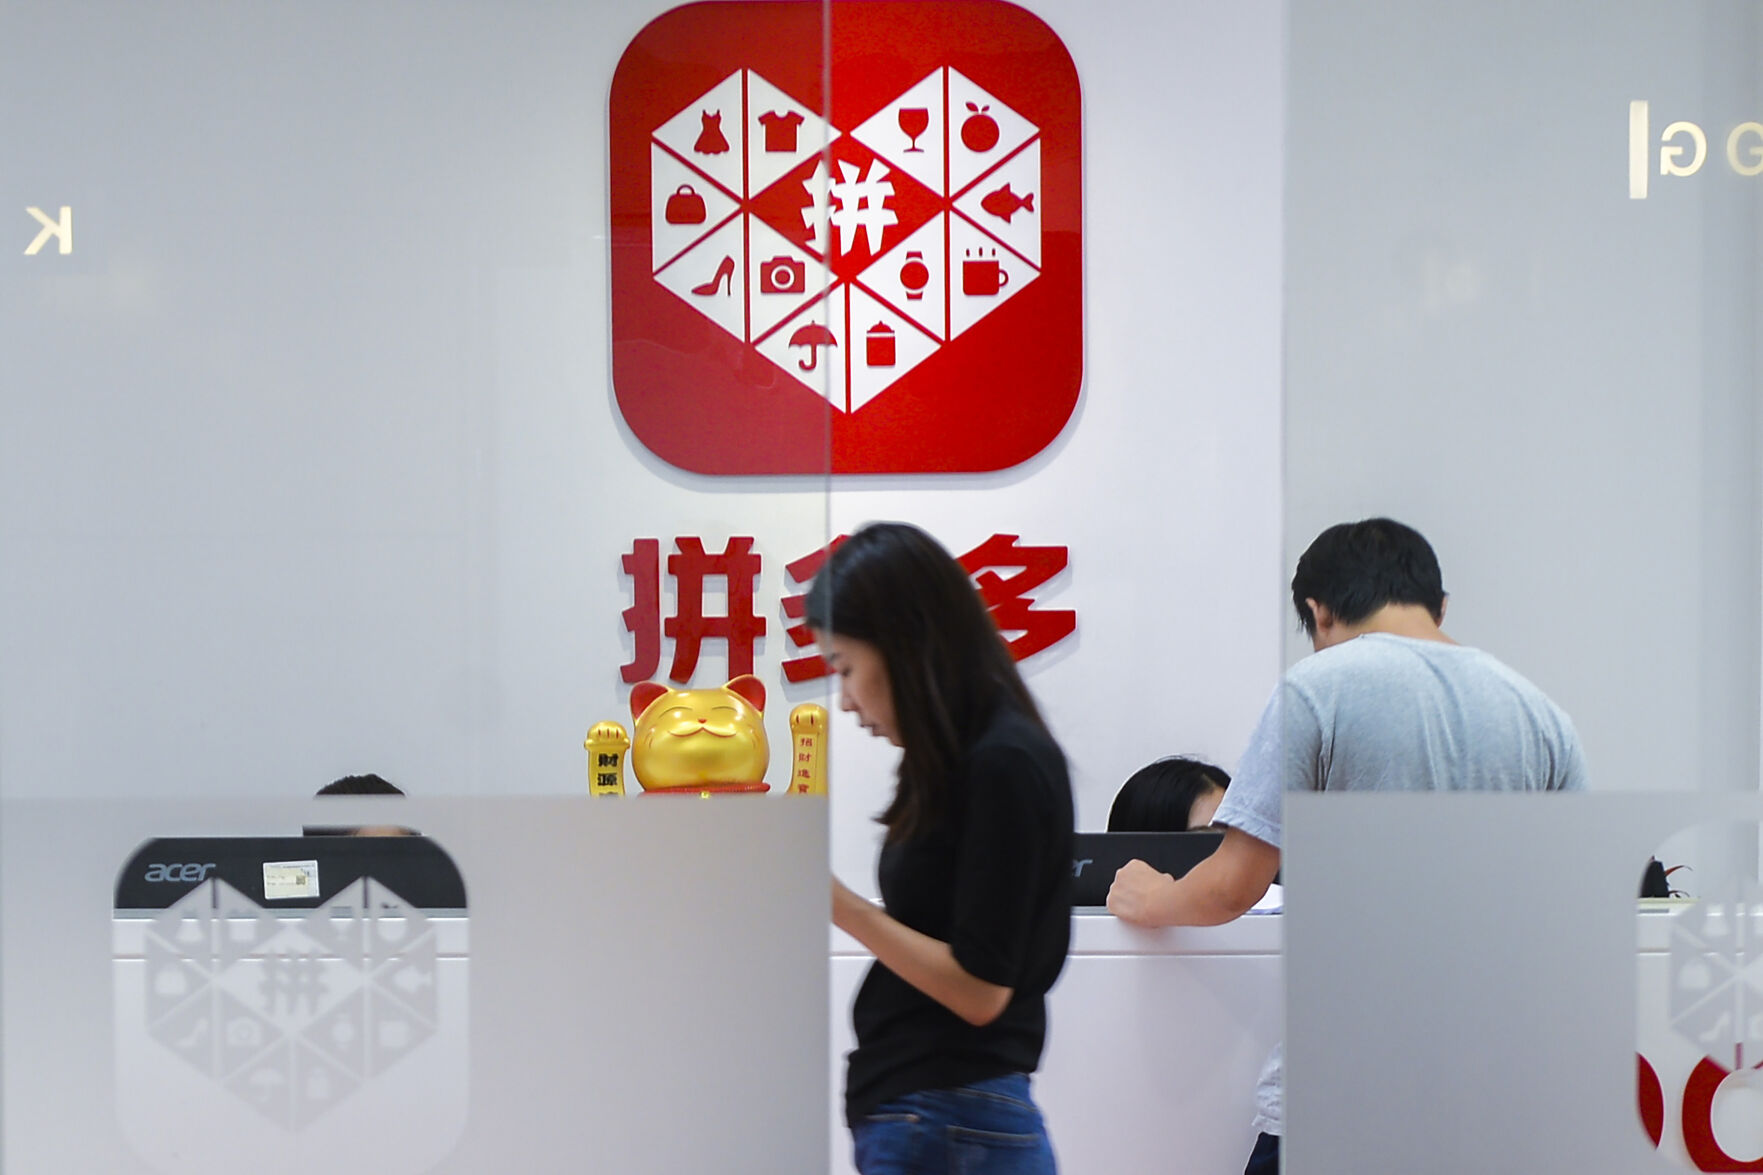 <p>A woman walks past the reception desk at the headquarters of Pinduoduo with the logo displayed in the background in Shanghai, on July 25, 2018. Google on Tuesday, March 21, 2023 has suspended the Chinese shopping app Pinduoduo on its app store after malware was discovered in versions of the app from other sources. (Chinatopix via AP)</p>   PHOTO CREDIT: CHINATOPIX